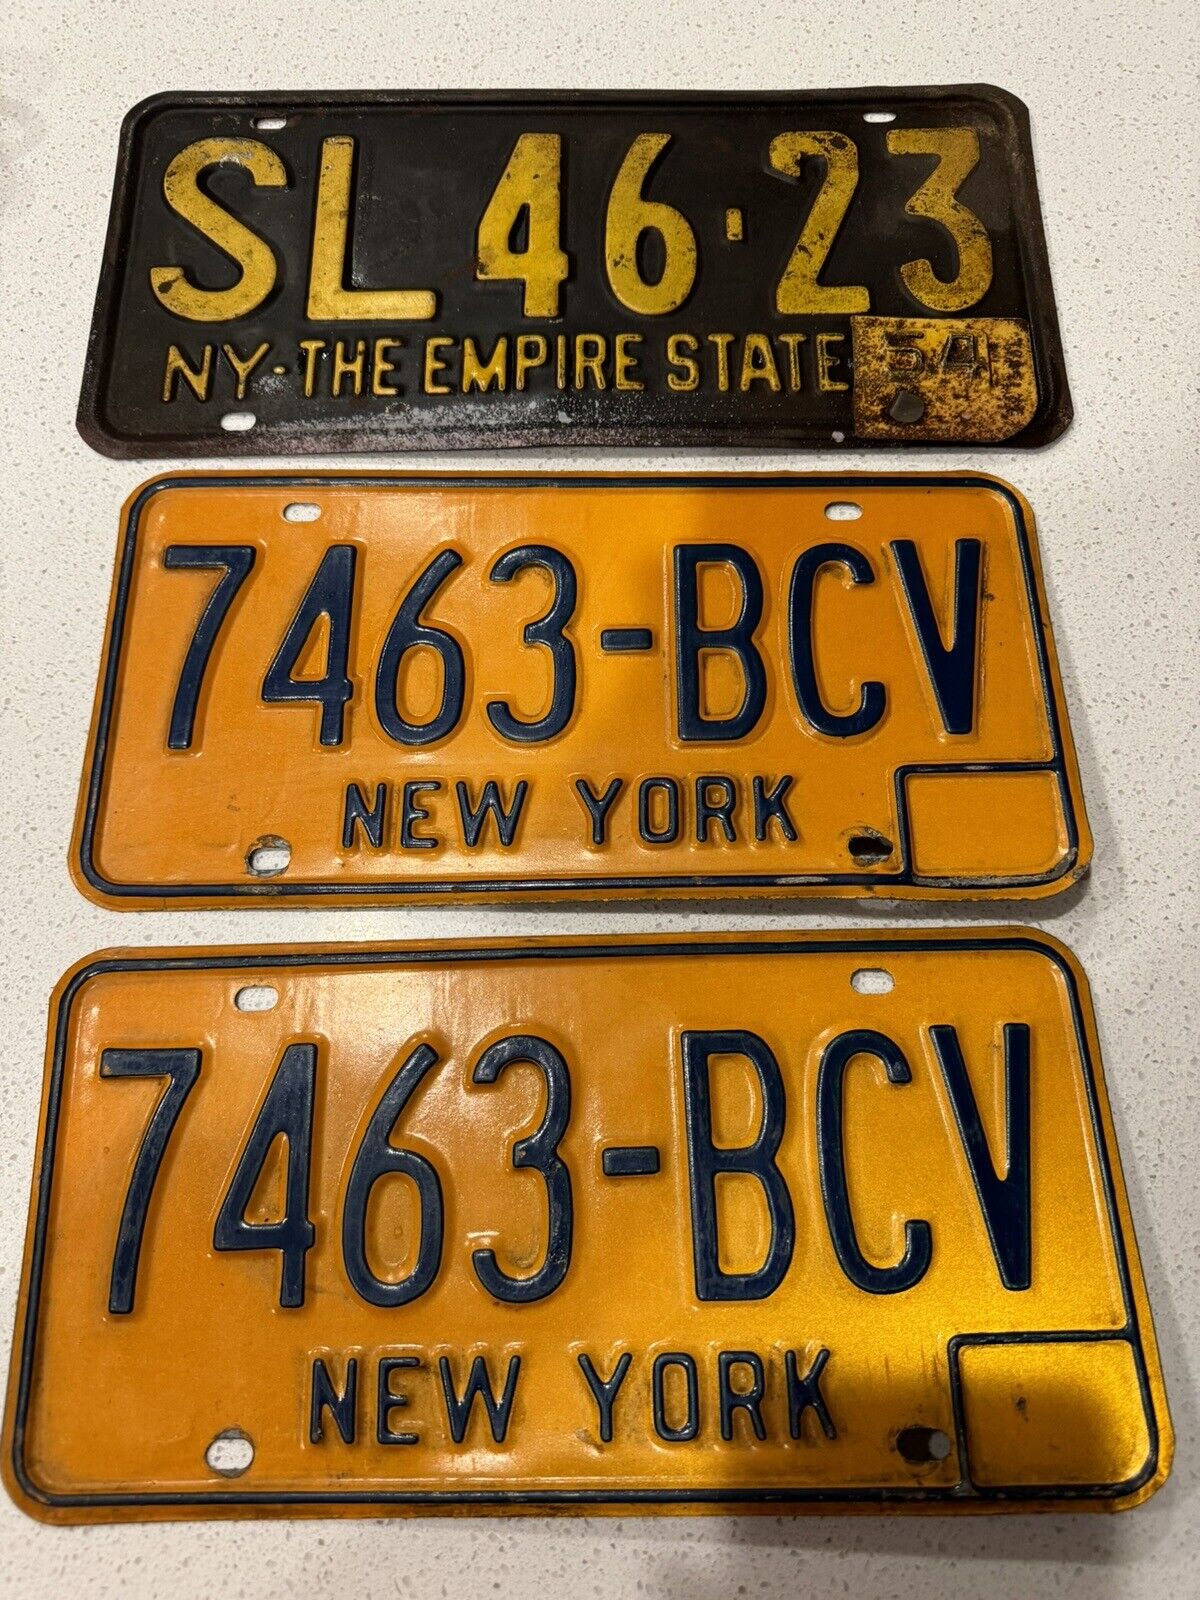 1954 Vintage New York License Plate & A Set Of New York Plates With No Date Tags